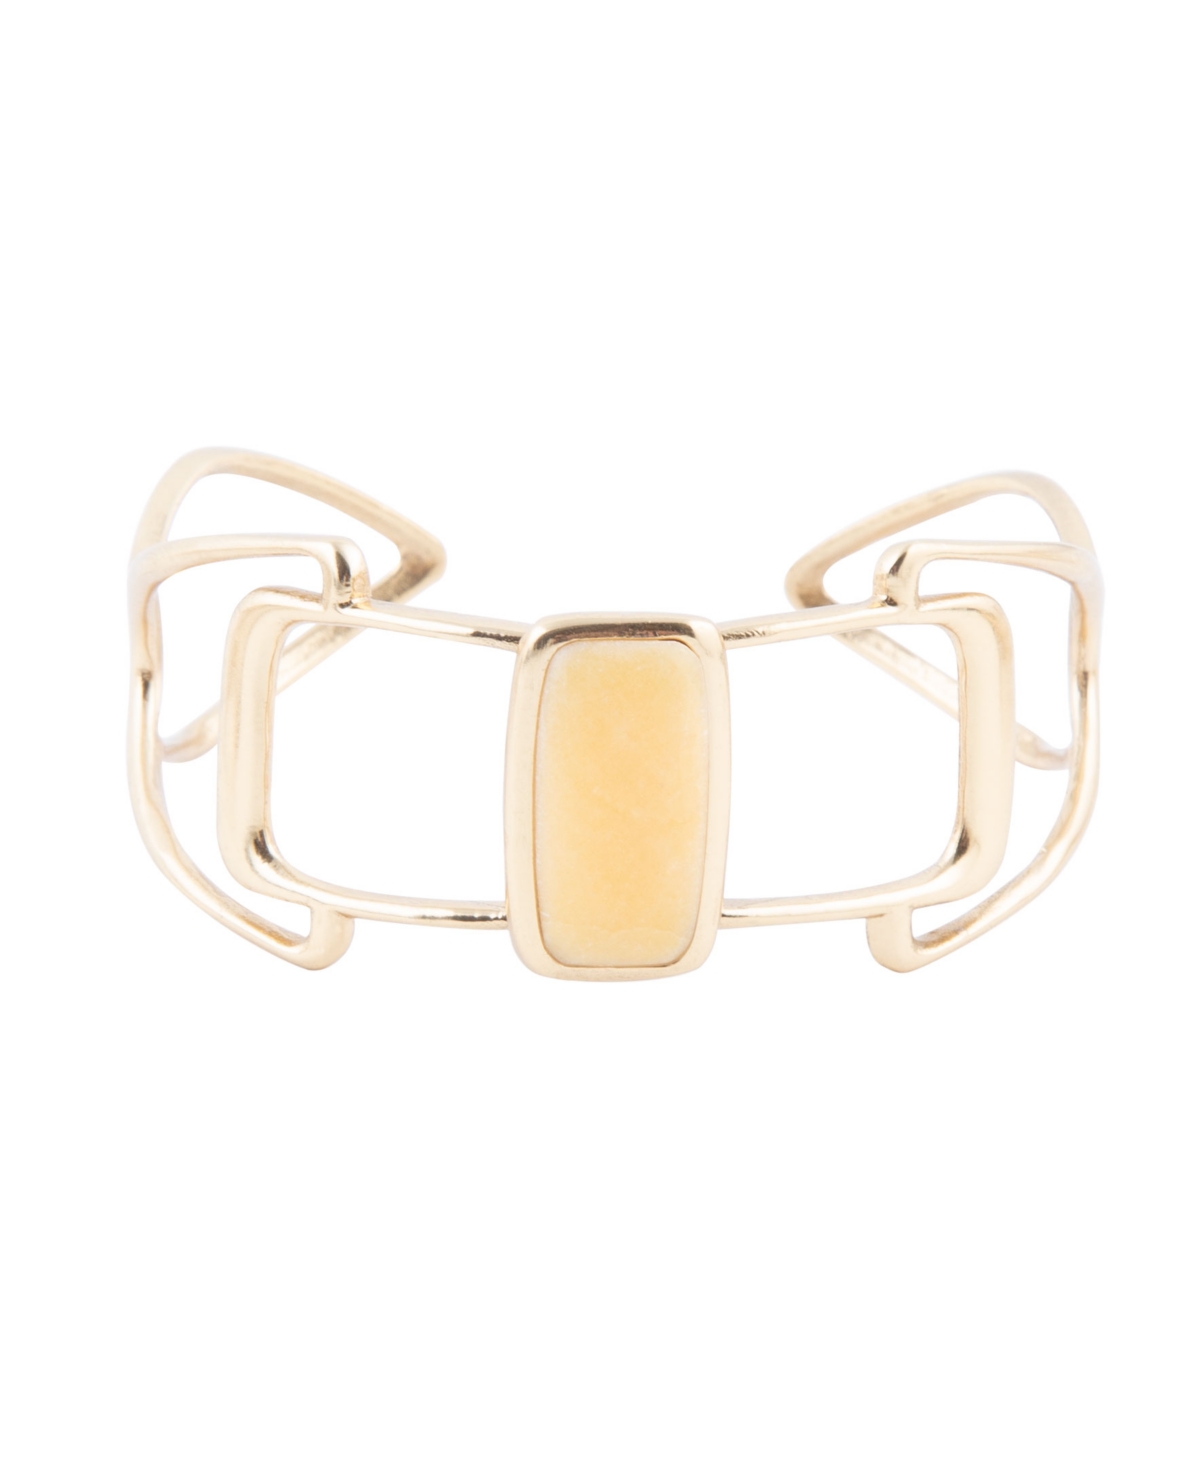 Shop Barse Luster Genuine Yellow Agate Rectangle Cuff Bracelet